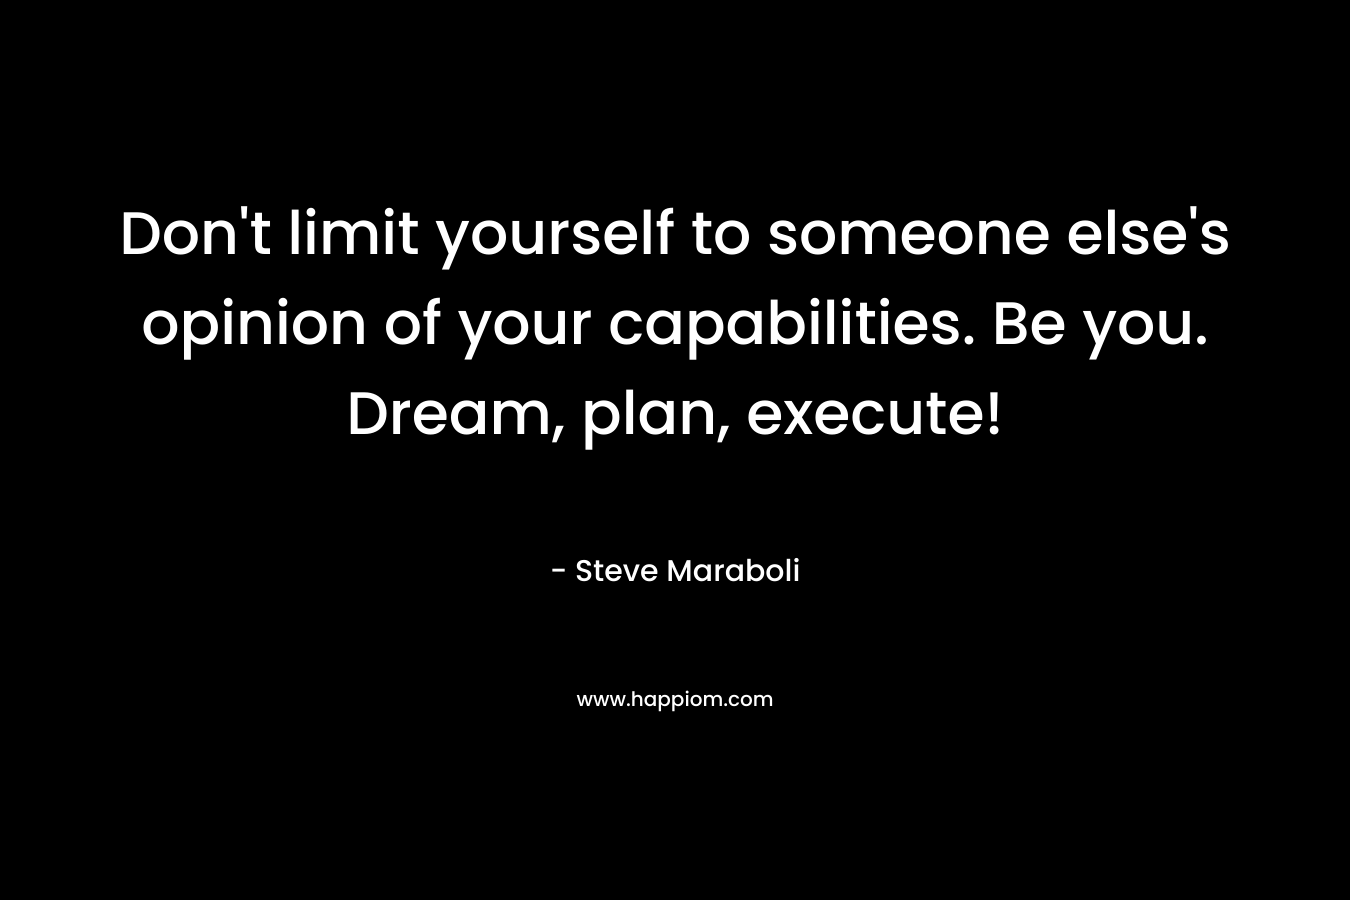 Don't limit yourself to someone else's opinion of your capabilities. Be you. Dream, plan, execute!